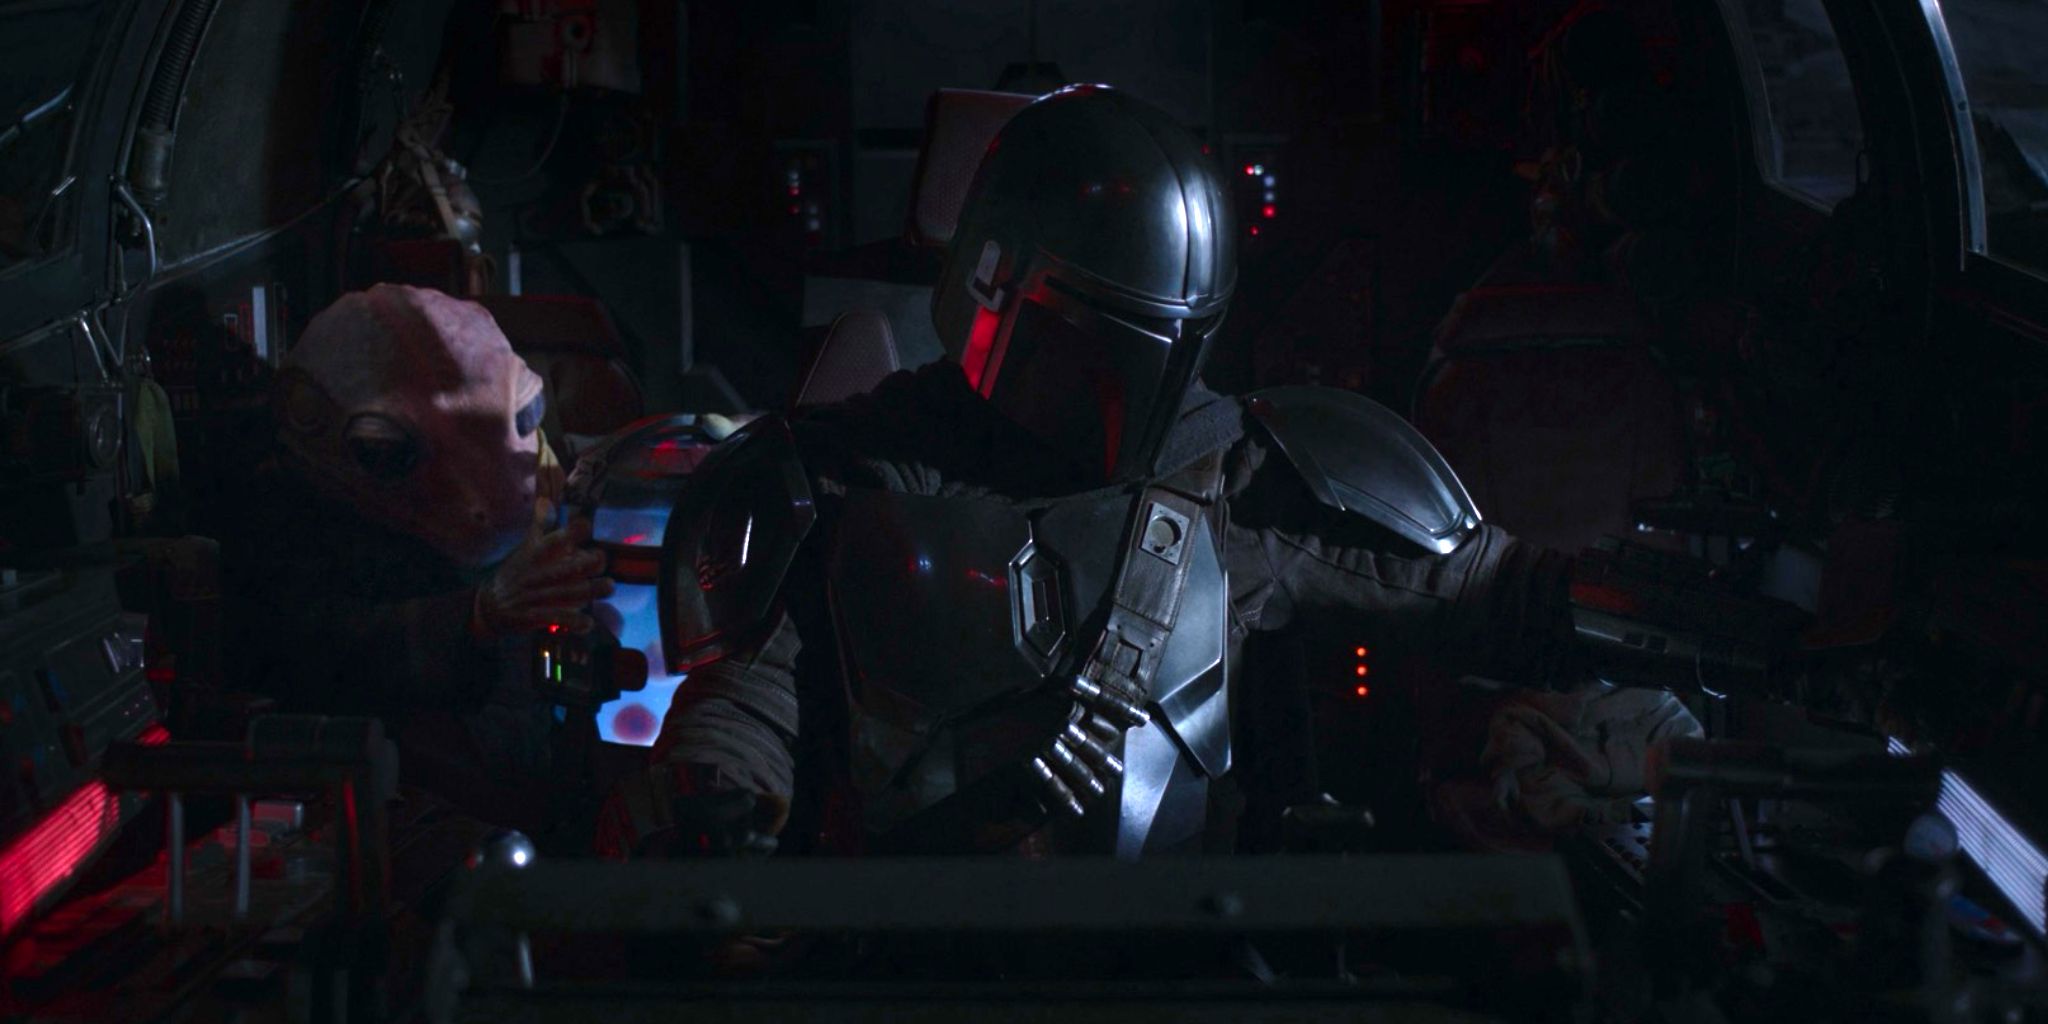 Din Djarin, Frog Lady, and Grogu all sit in the Razor Crest cockpit in The Mandalorian season 2, episode 3